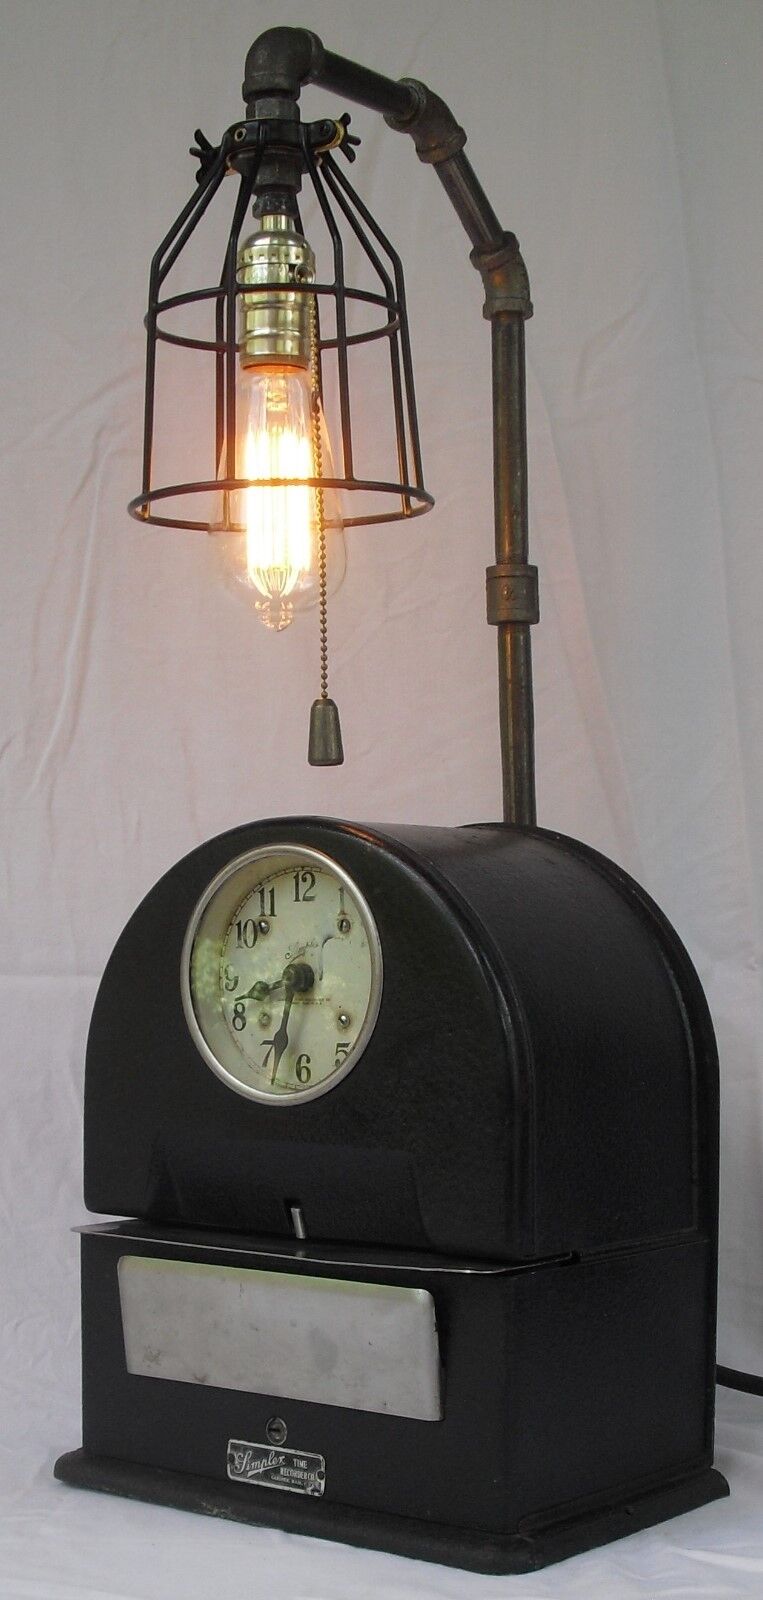 ORIGINAL ONE-OF-A-KIND STEAMPUNK BLACK TOMBSTONE TIME CLOCK LAMP Industrial